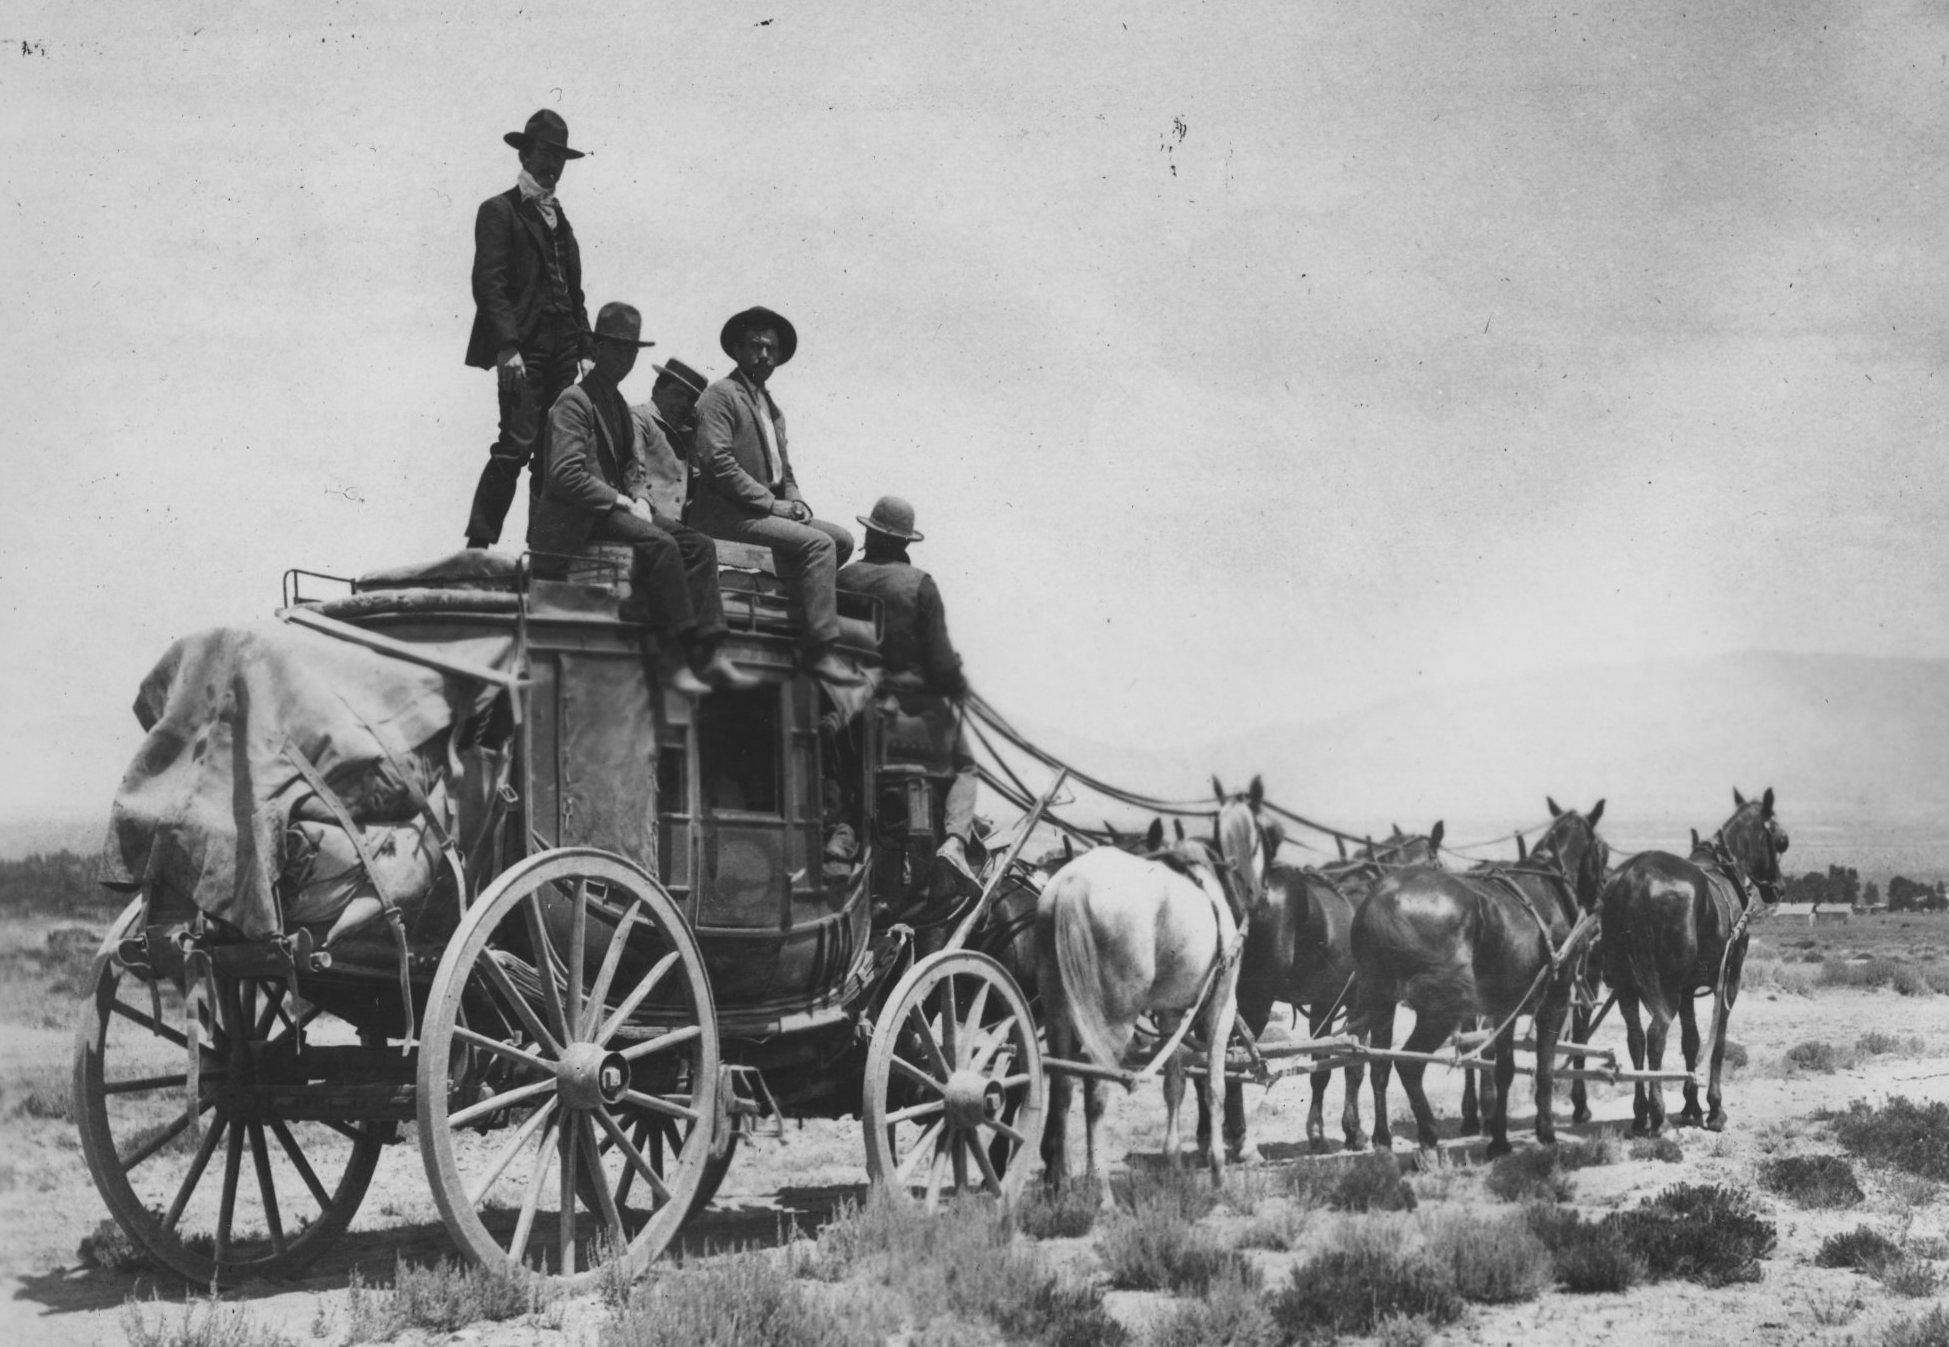 Circa 1900 photograph of stagecoach being pulled by six horses.